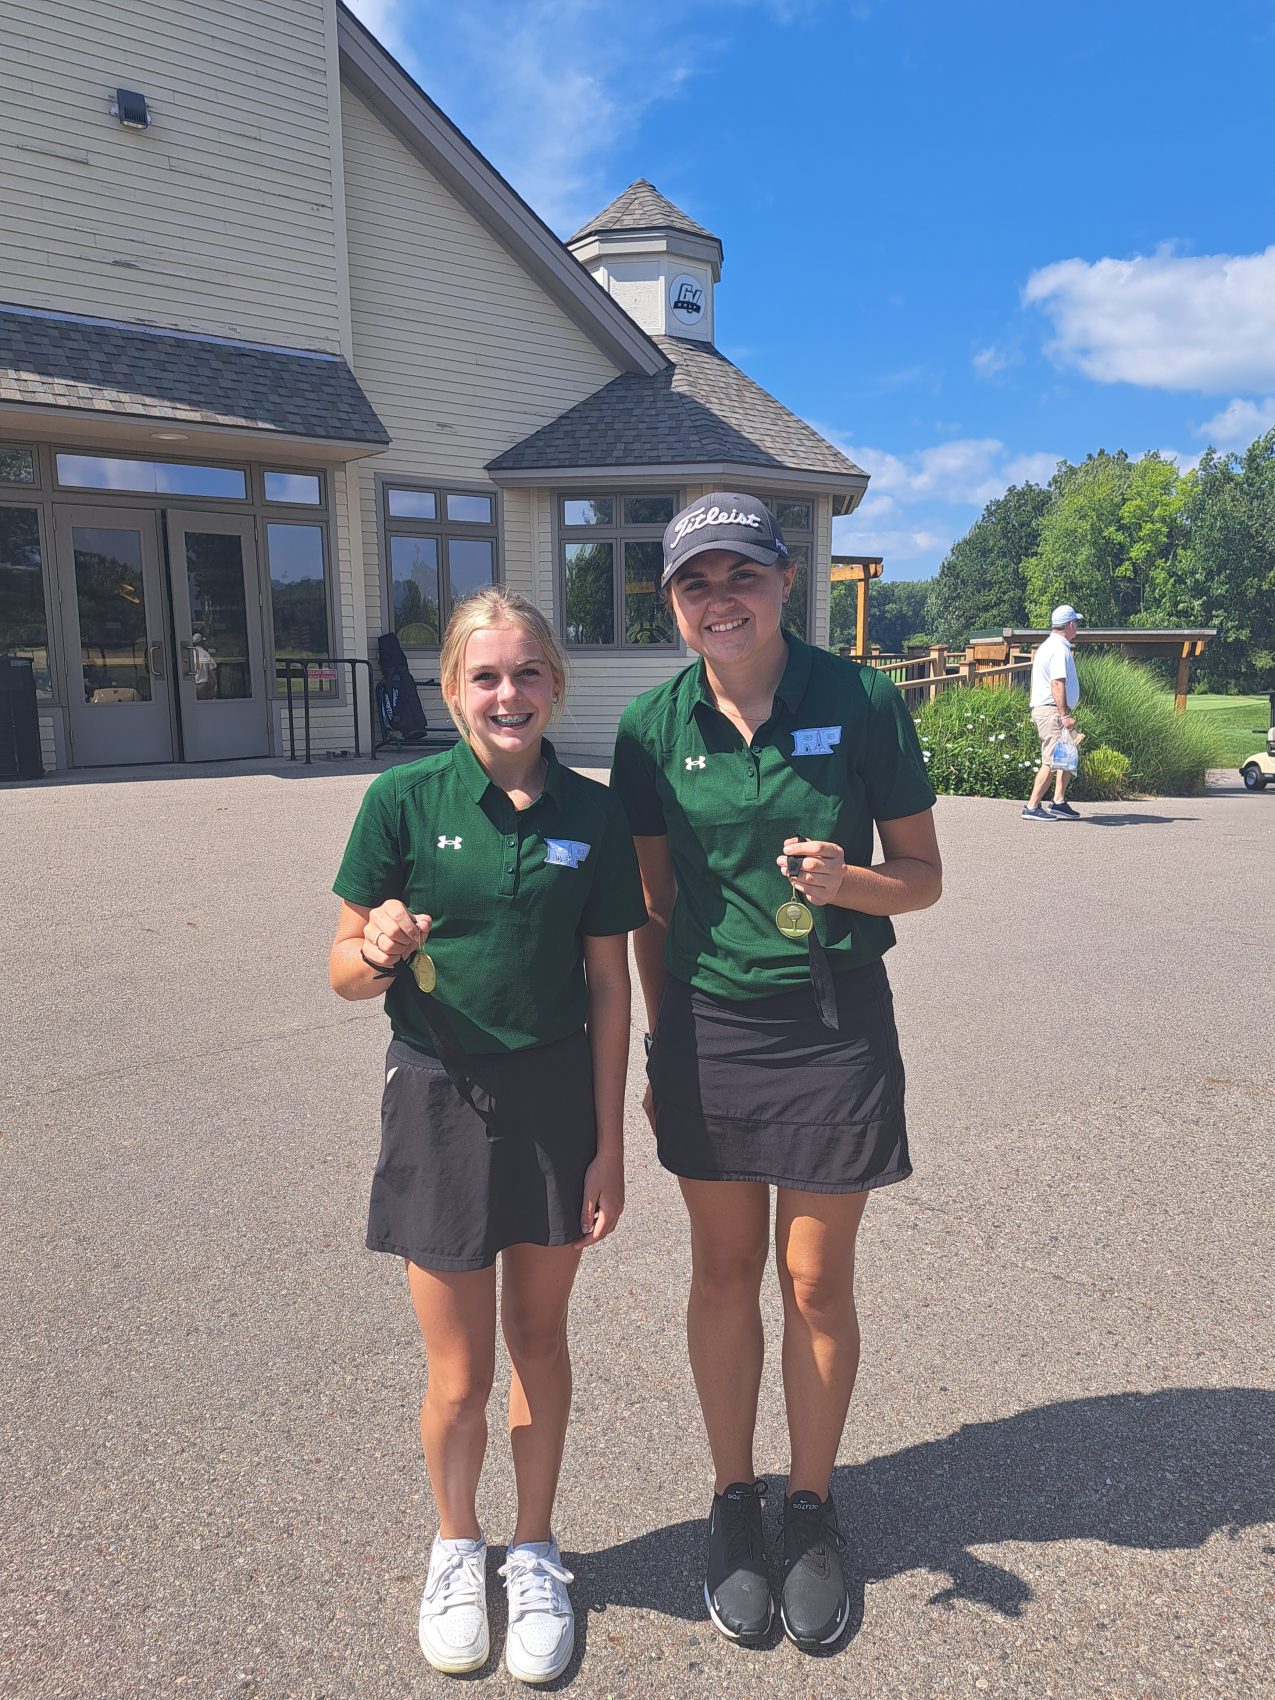 Reeths-Puffer golfers claim seventh place at Sydney Carfine Memorial Tournament